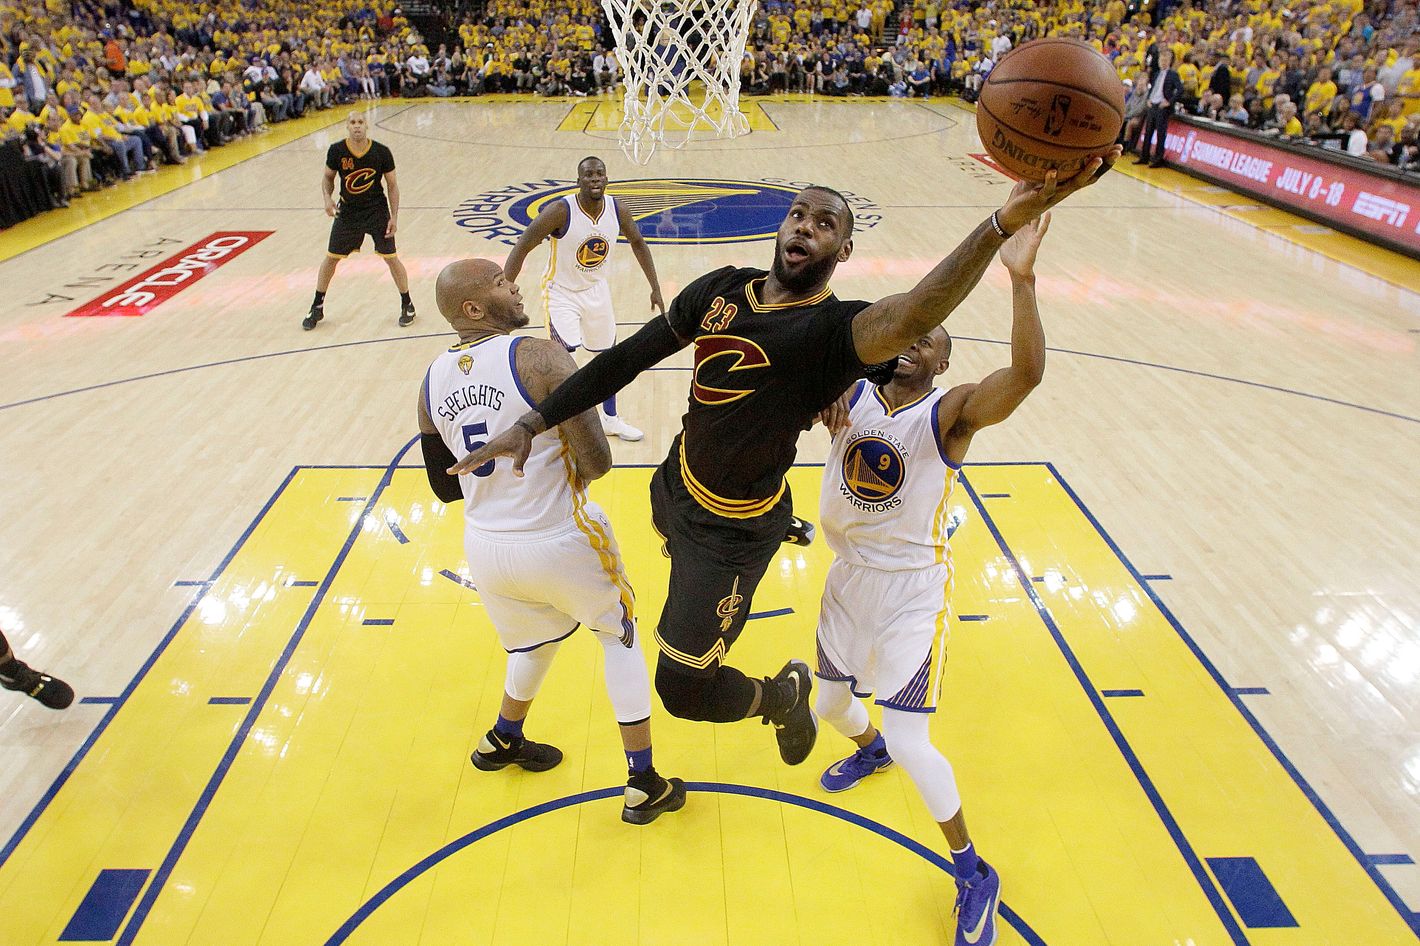 Curry or LeBron? NBA Finals picks for Warriors vs. Cavaliers